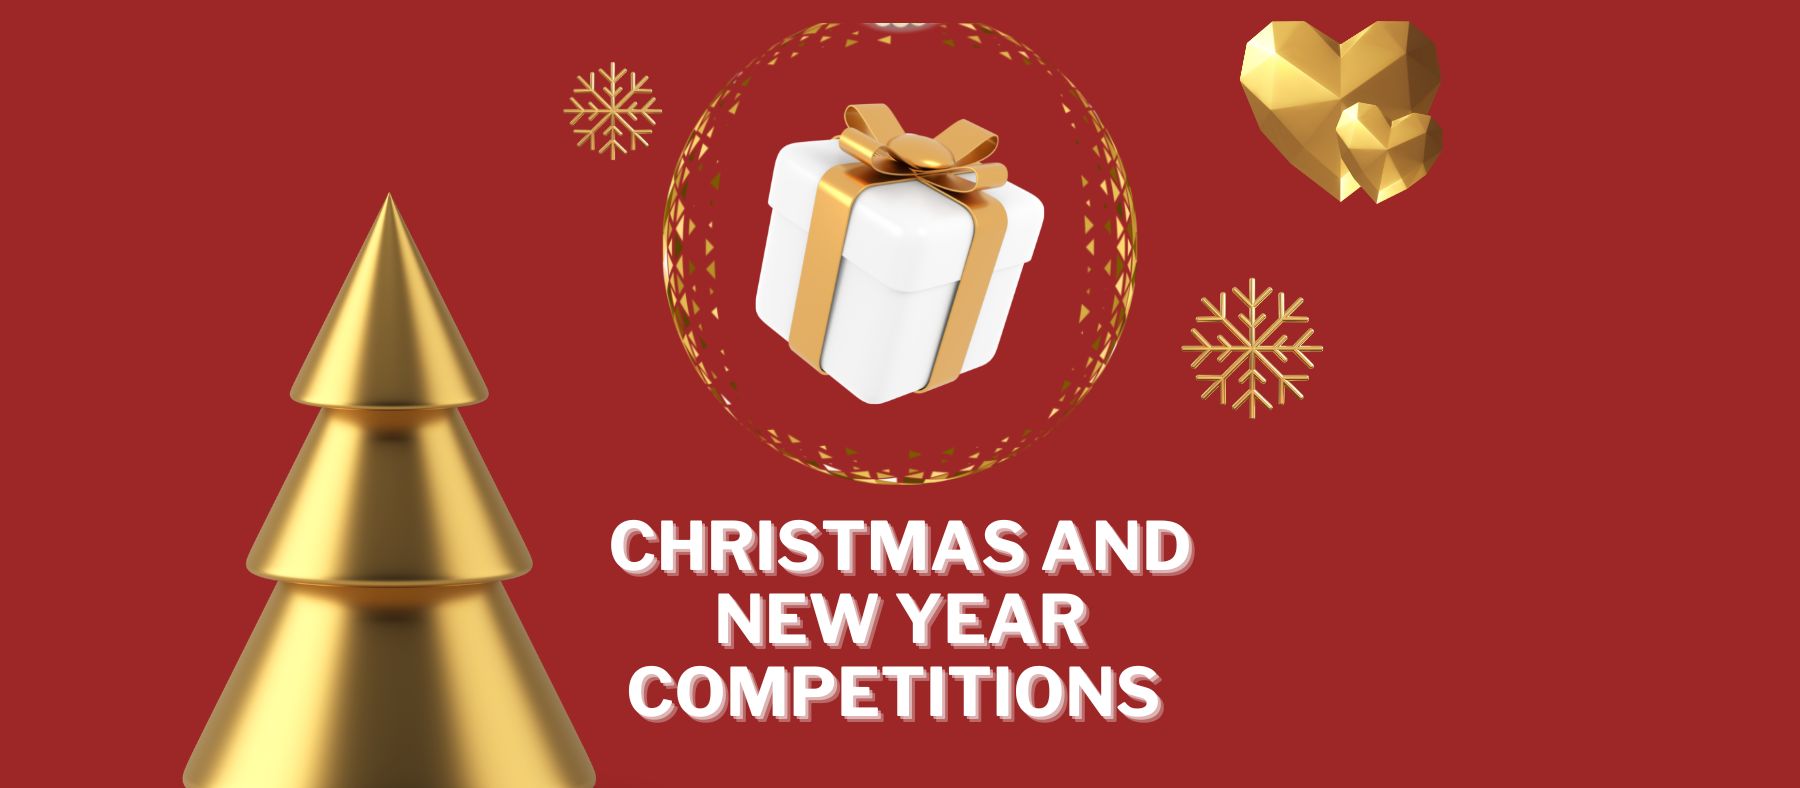 Christmas and New Year Competitions – Upcoming giveaways and winner announcements